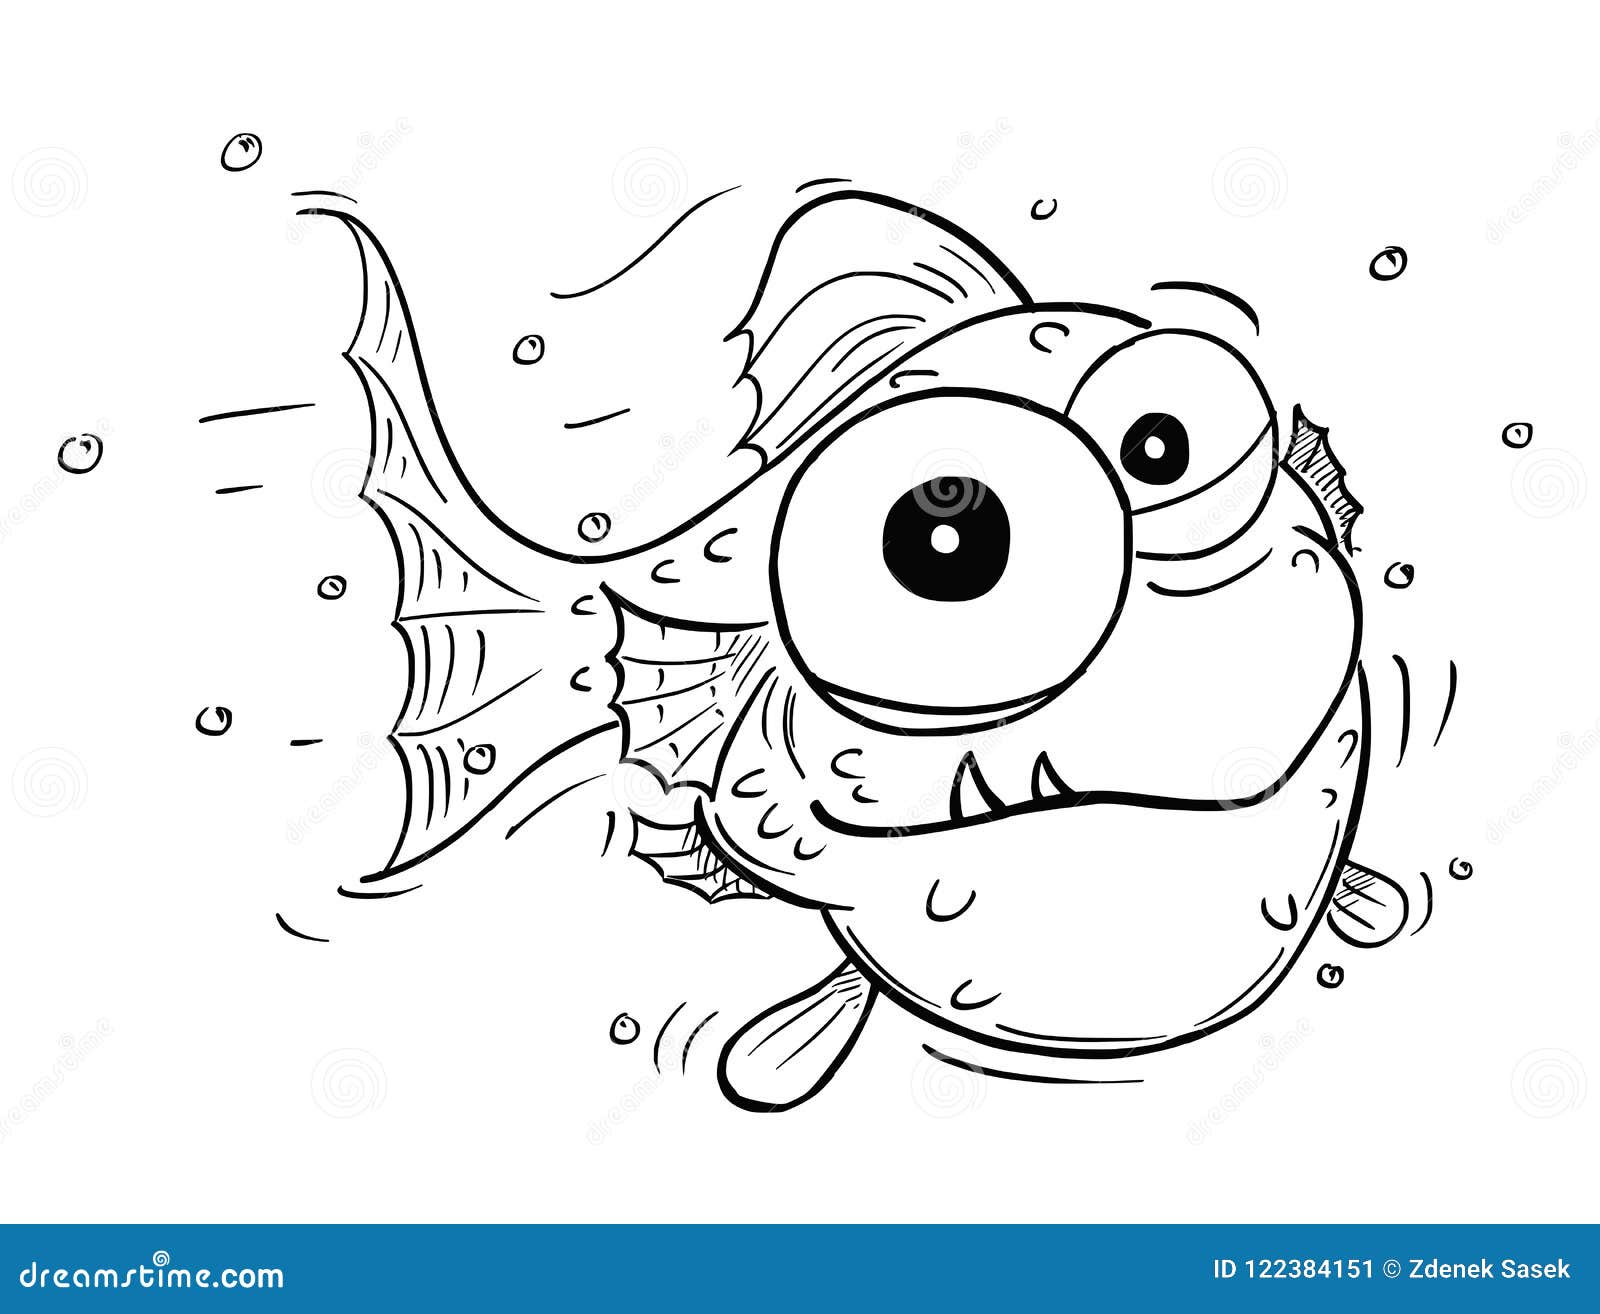 Amazon.co.jp: Cute Fish Drawing Book: Sketch in your own style. : Ojha, Mr  Arun: Foreign Language Books